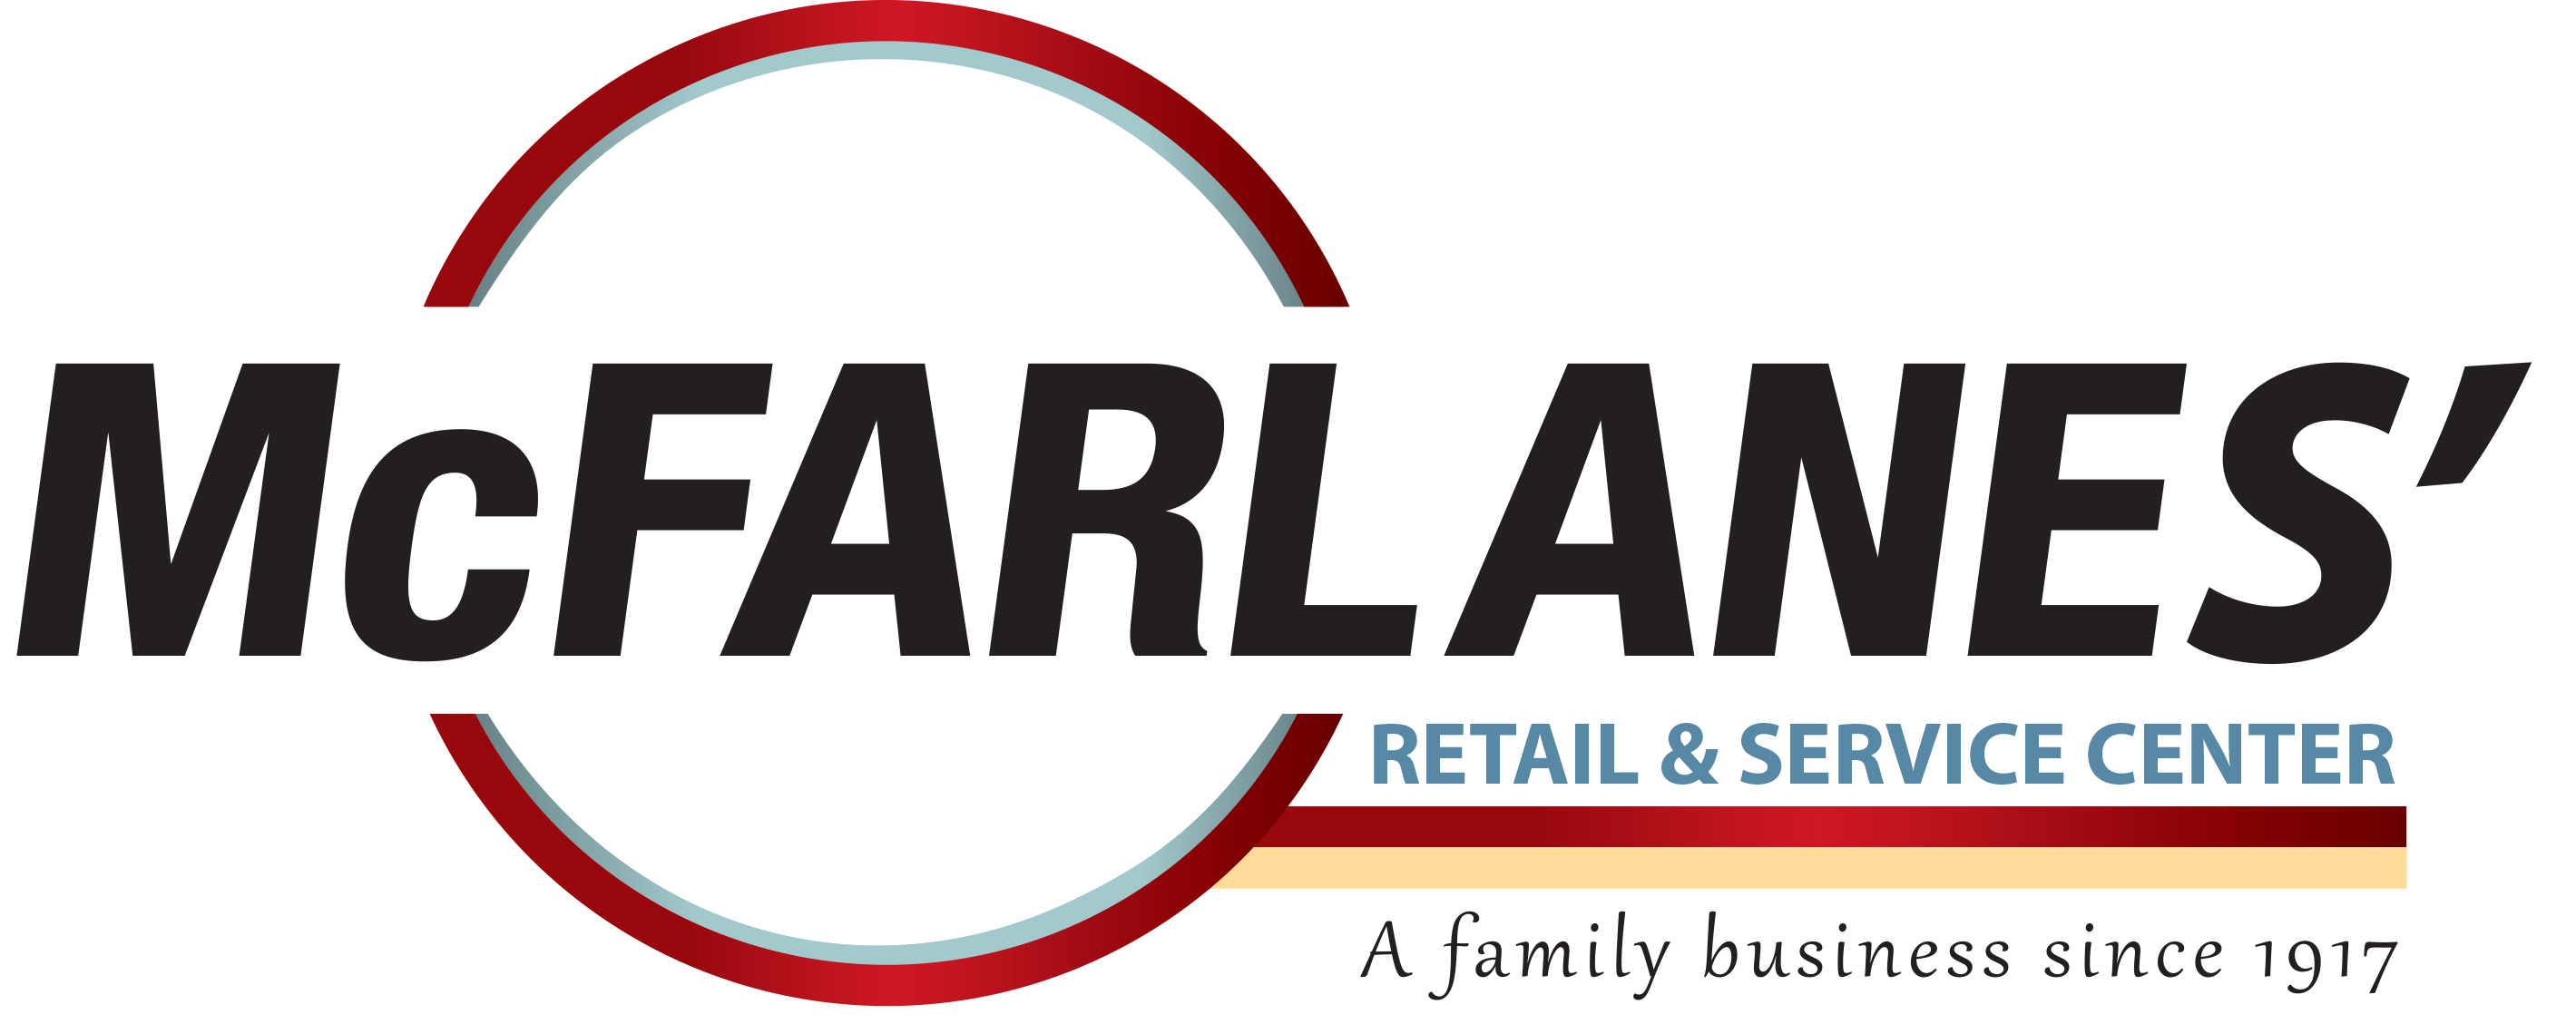 McFarlane Retail and Service Center